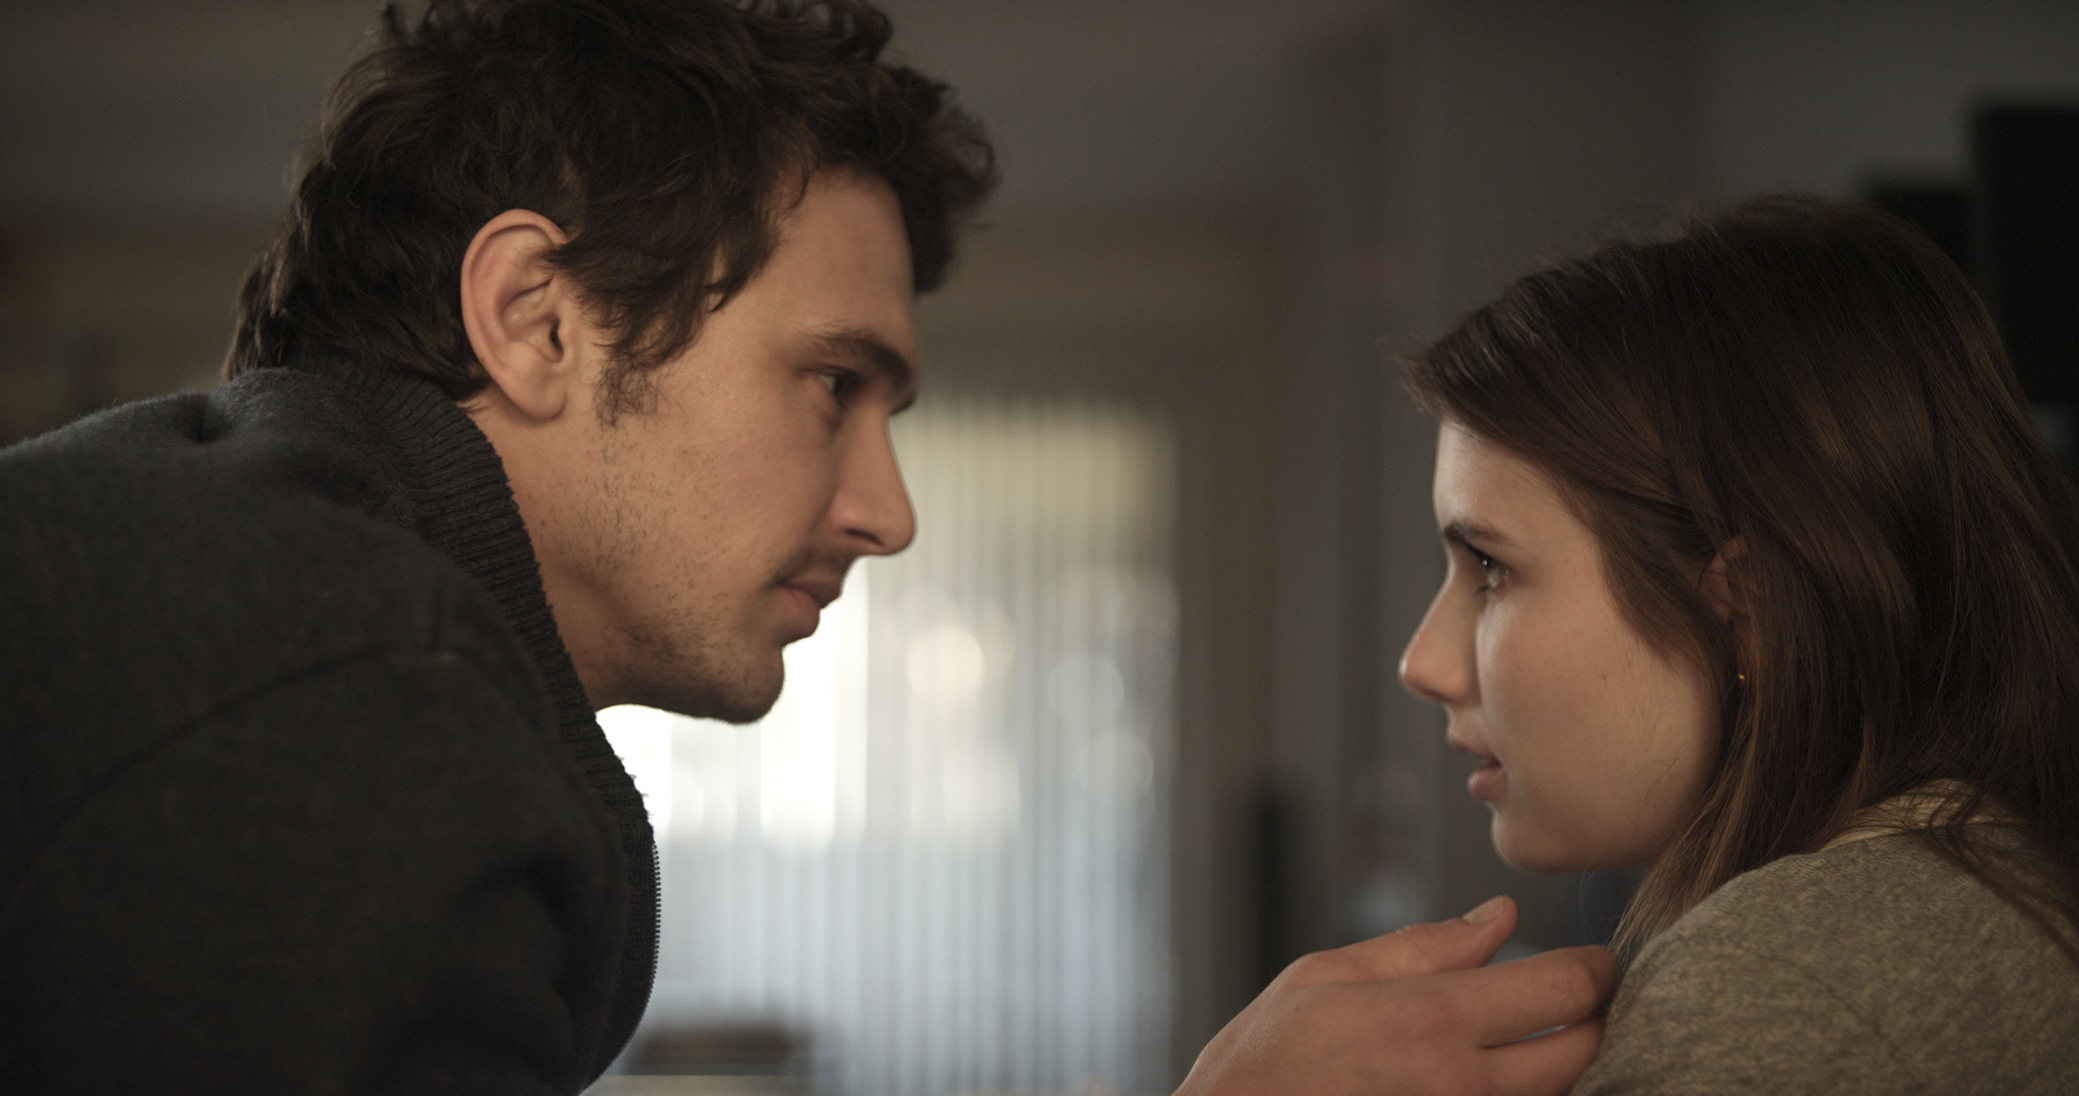 Image is from the film 'Palo Alto' (2013).  A teenage couple are alone in a room together and look as if they are about to kiss.